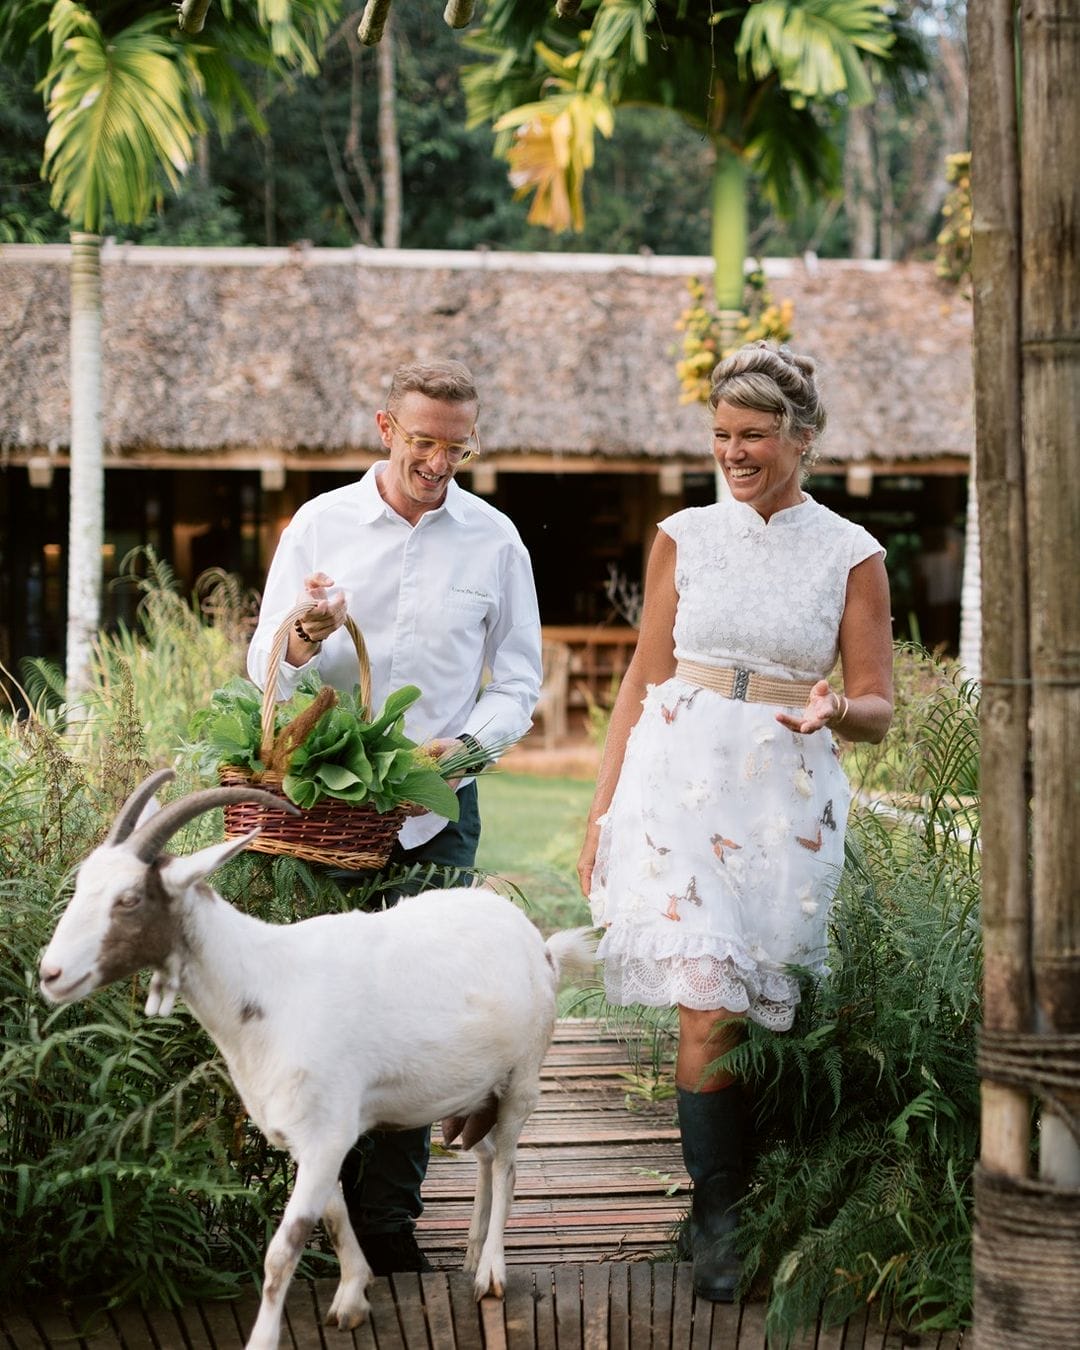 Rosewood Phuket Partners with Little Bukit Farm to Offer a Rustic Culinary Experience